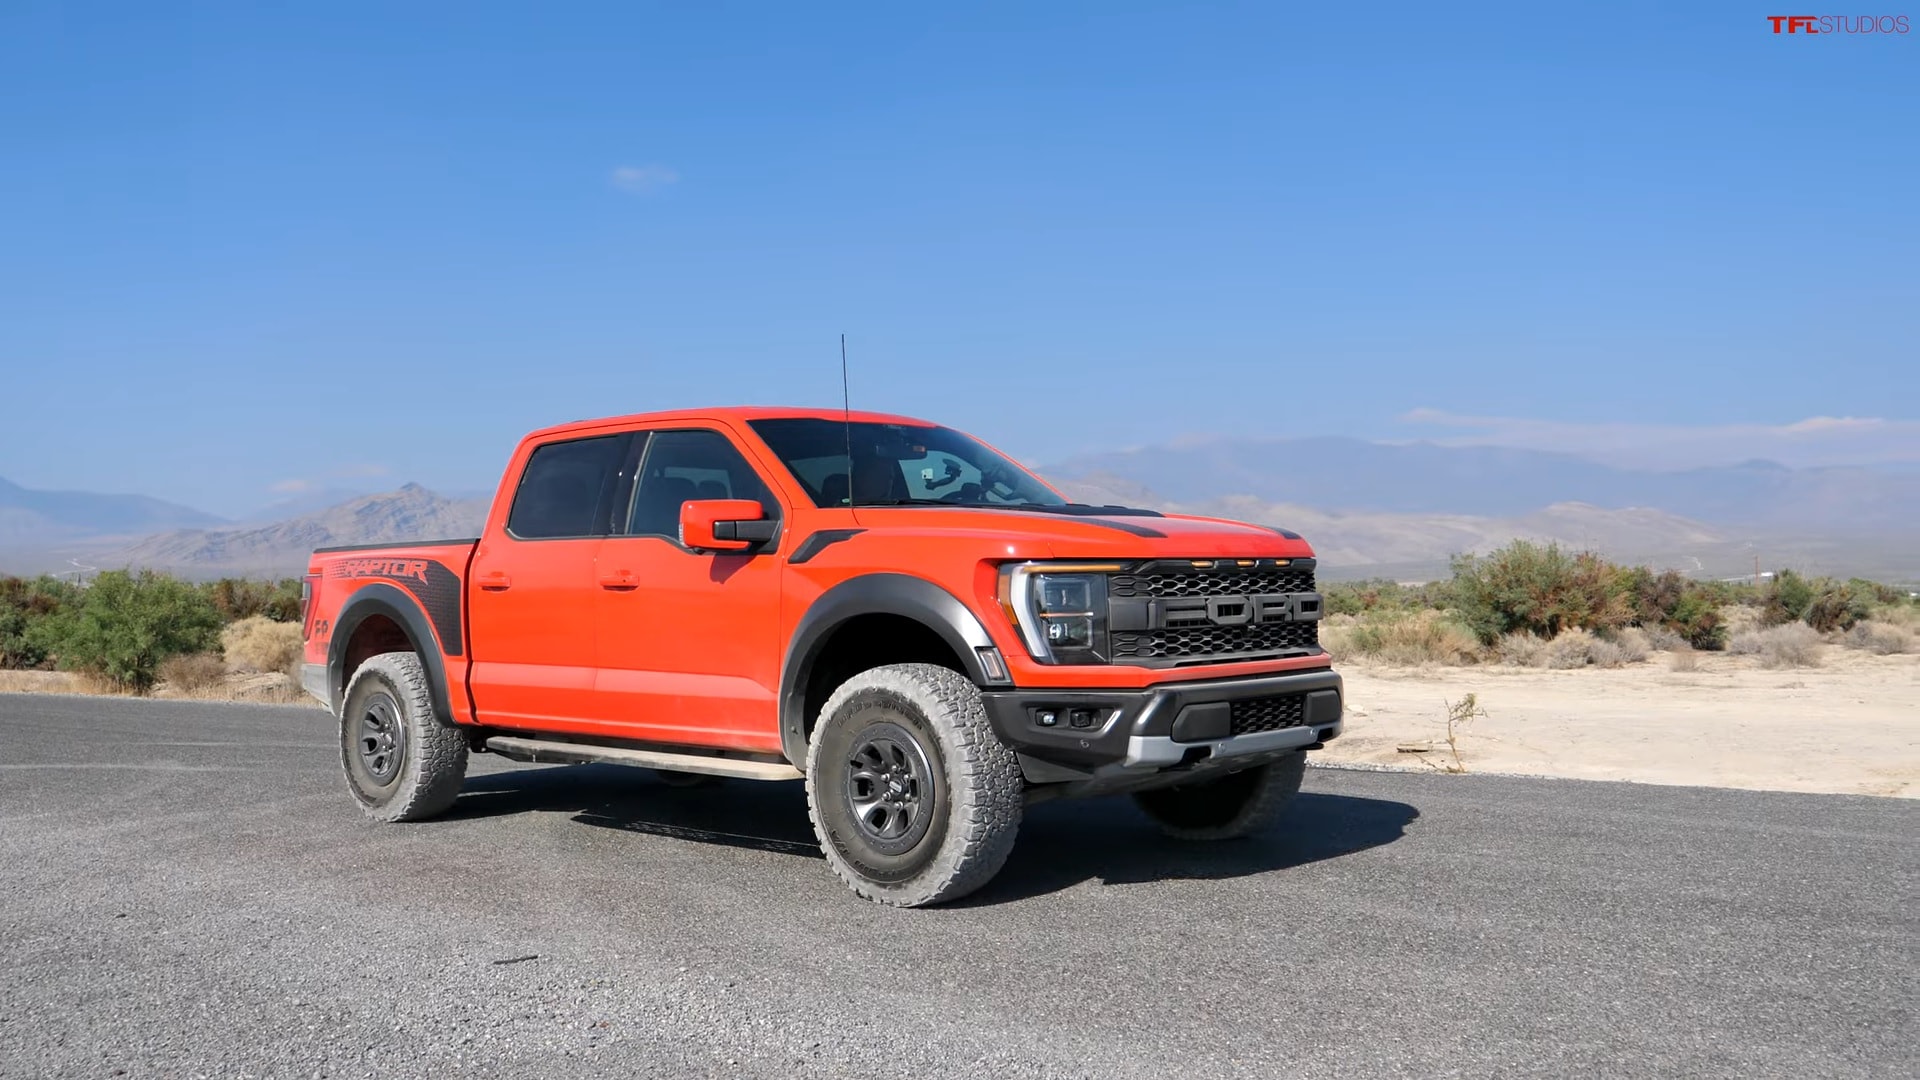 2021 Ford F 150 Raptor Acceleration Test Needs 75 Seconds To 60 Mph